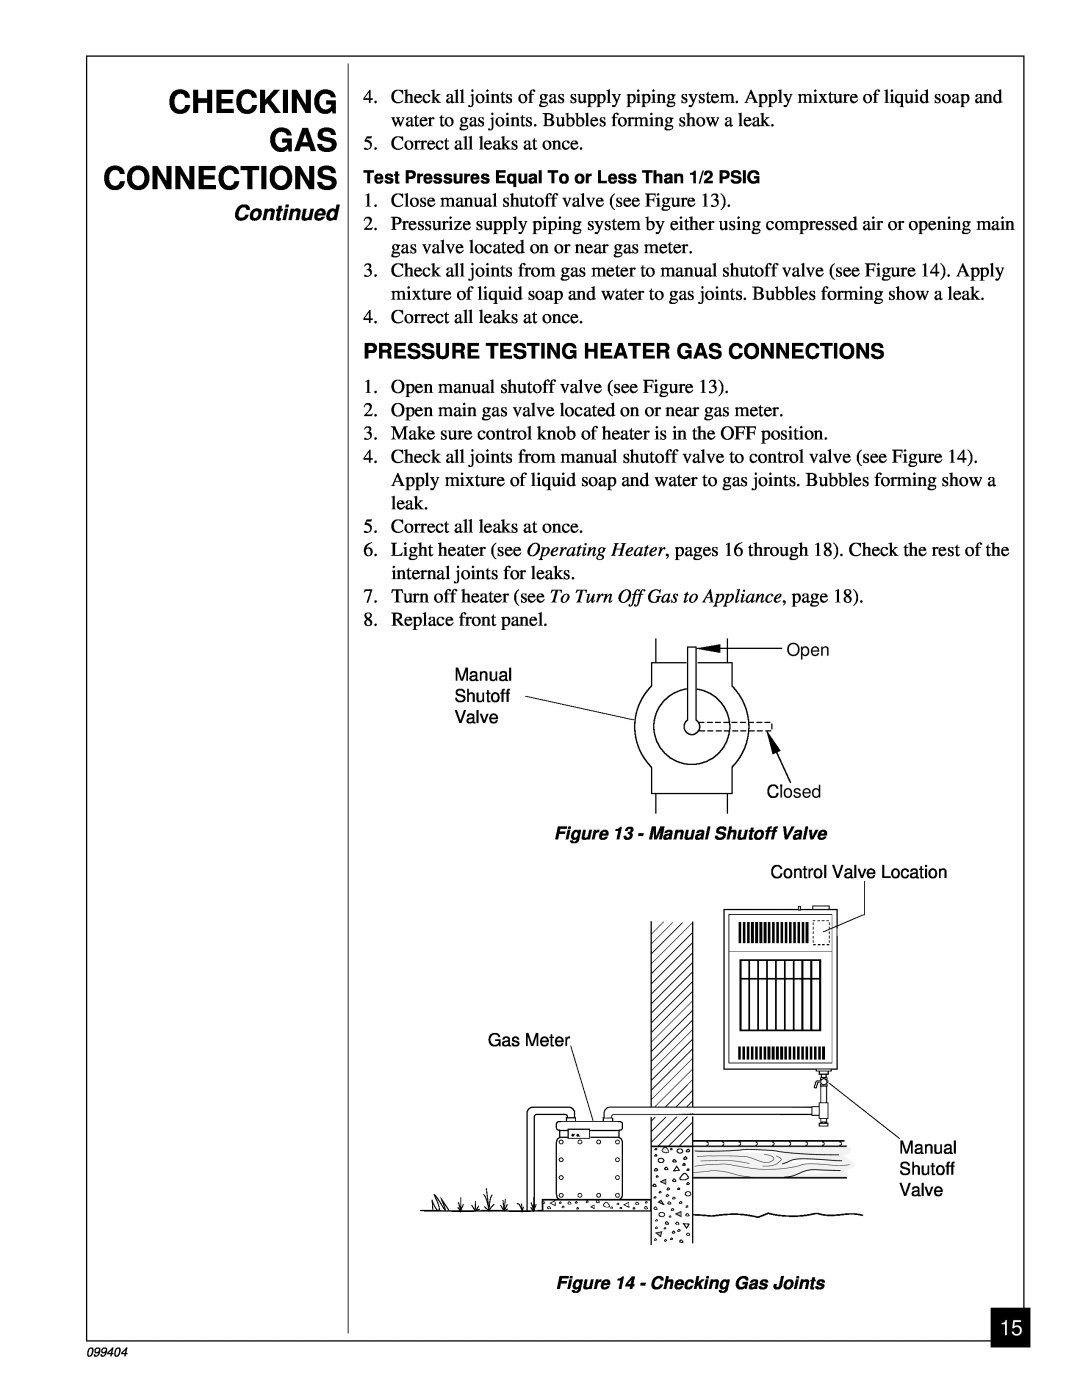 Desa CGN10 installation manual Checking, Continued, Pressure Testing Heater Gas Connections 